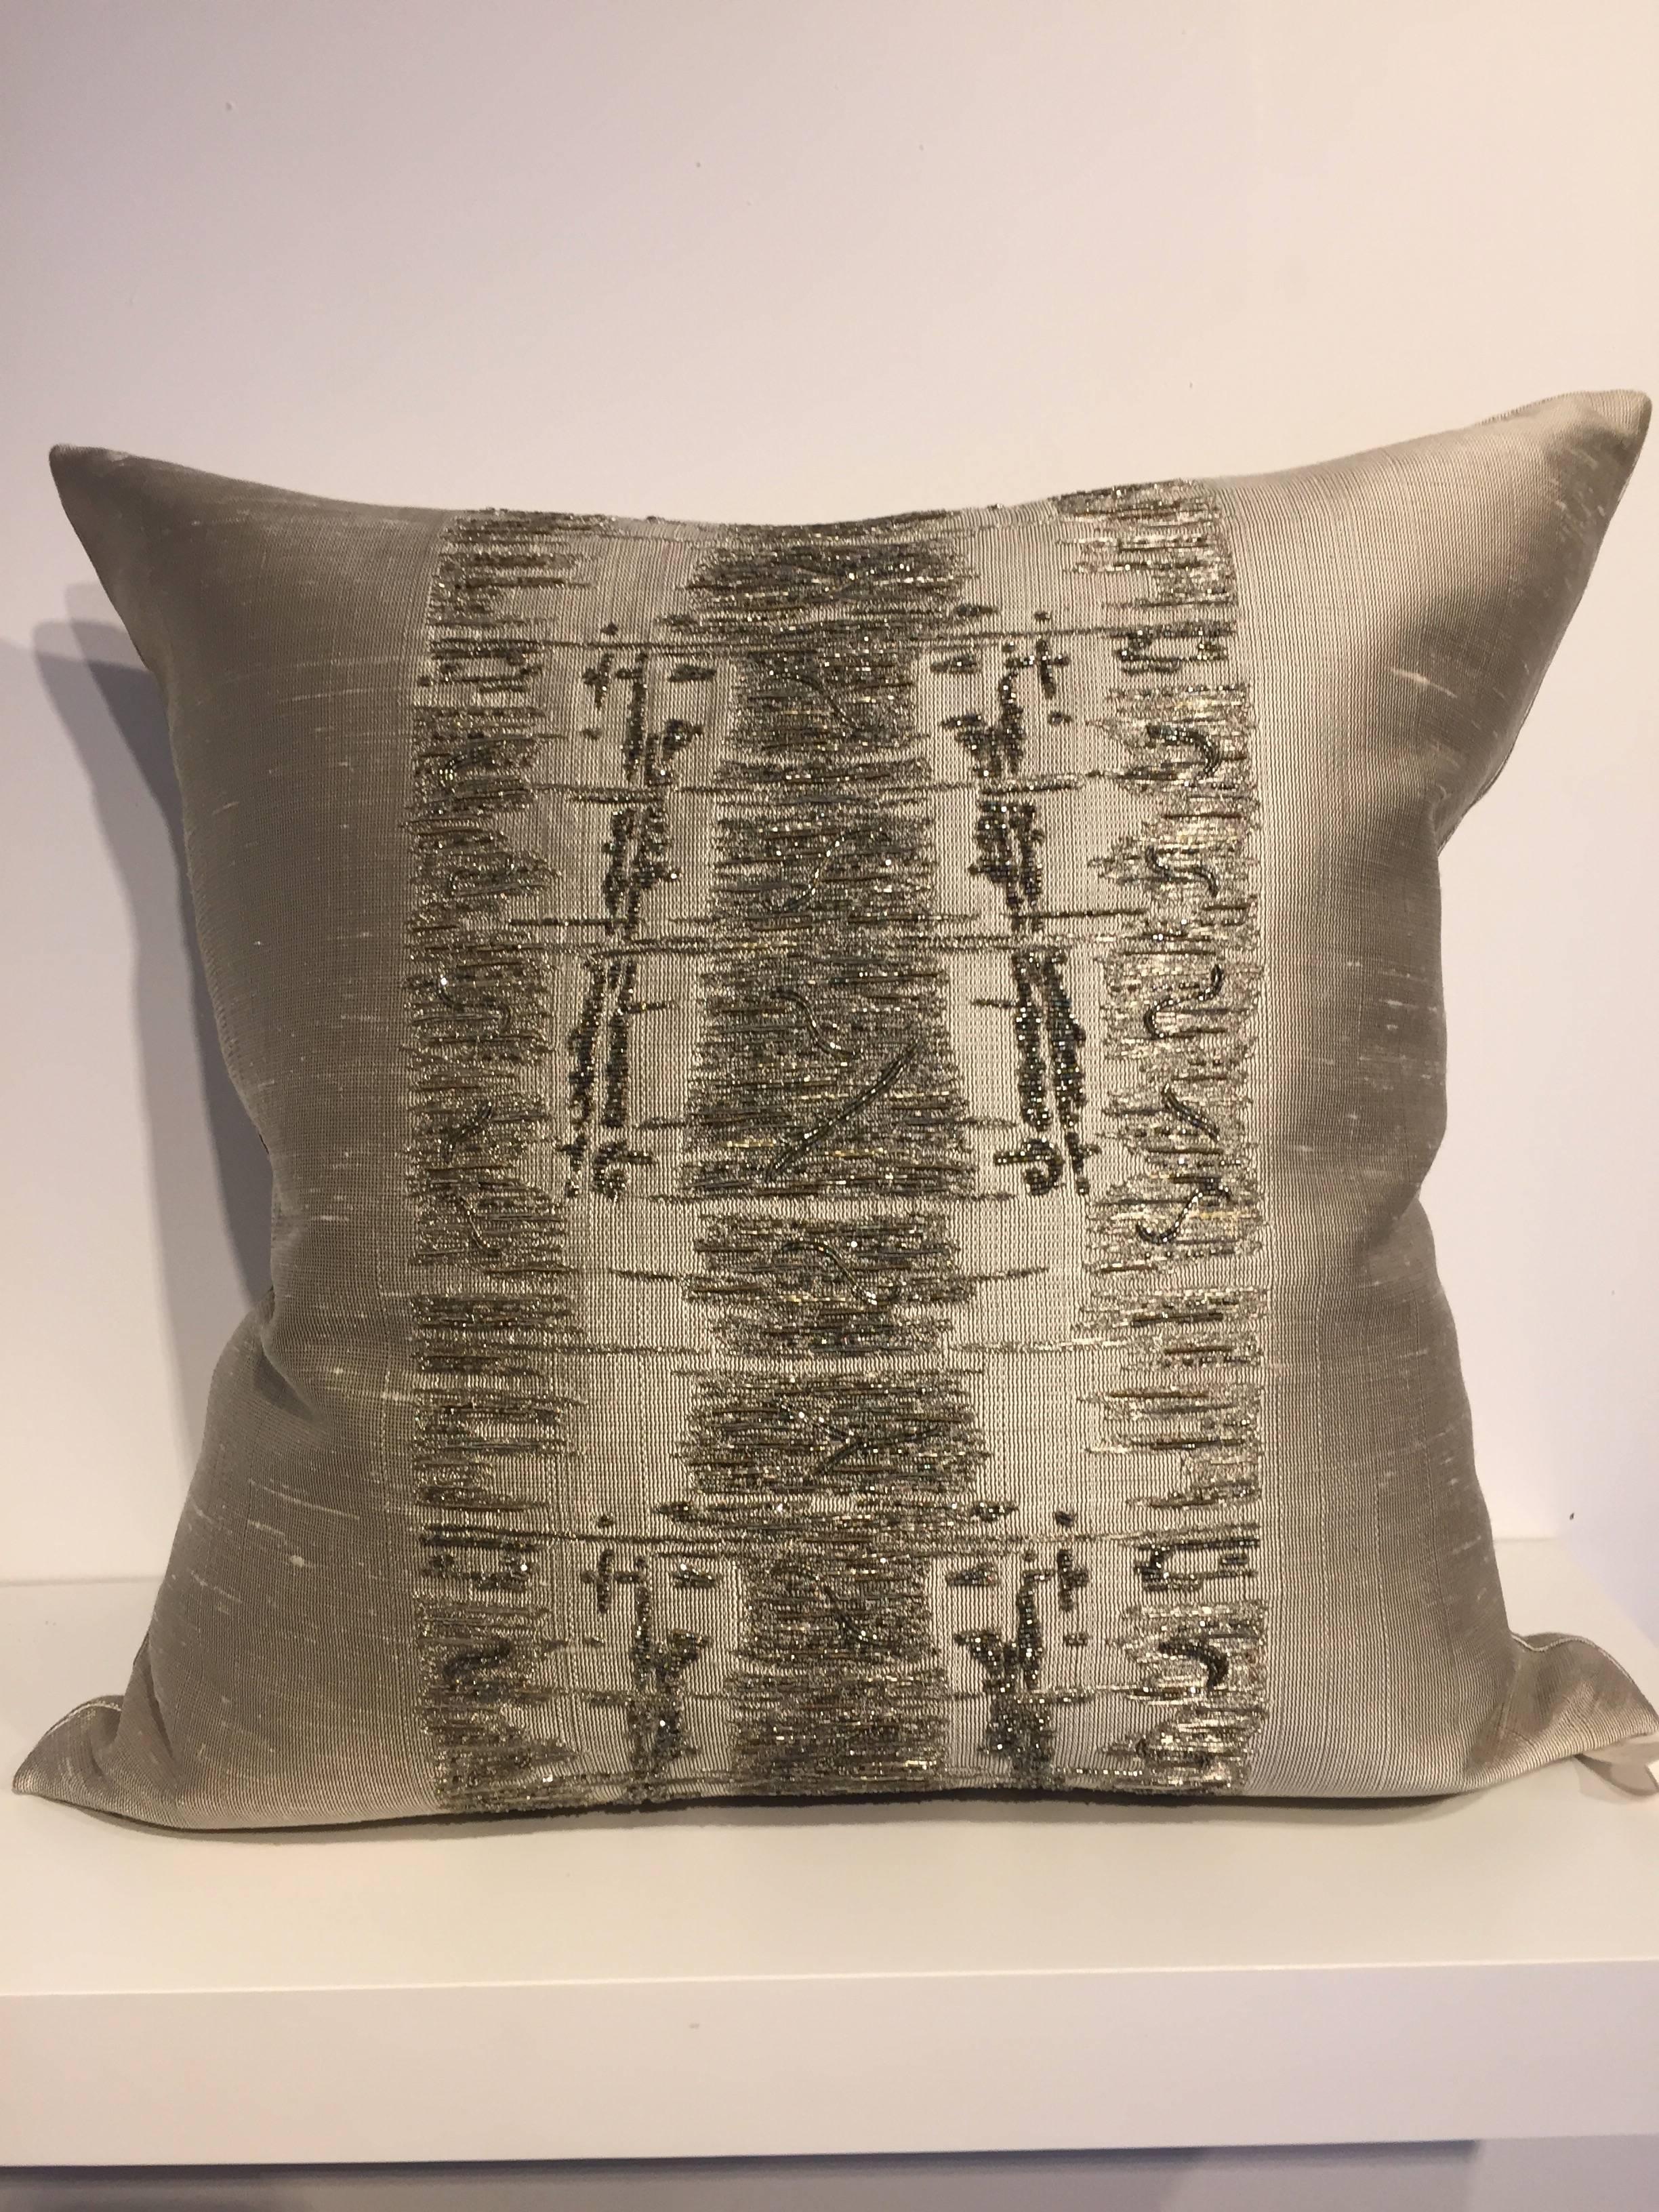 Pair of Cushions in handwoven Silk Bruno Triplet #68 color white gold with hand embroidery in silver thread and silver beads, contemporary design, size 50 x 50cm, cushion covers with cotton lining and concealer zipper in the bottom seam, inner pad